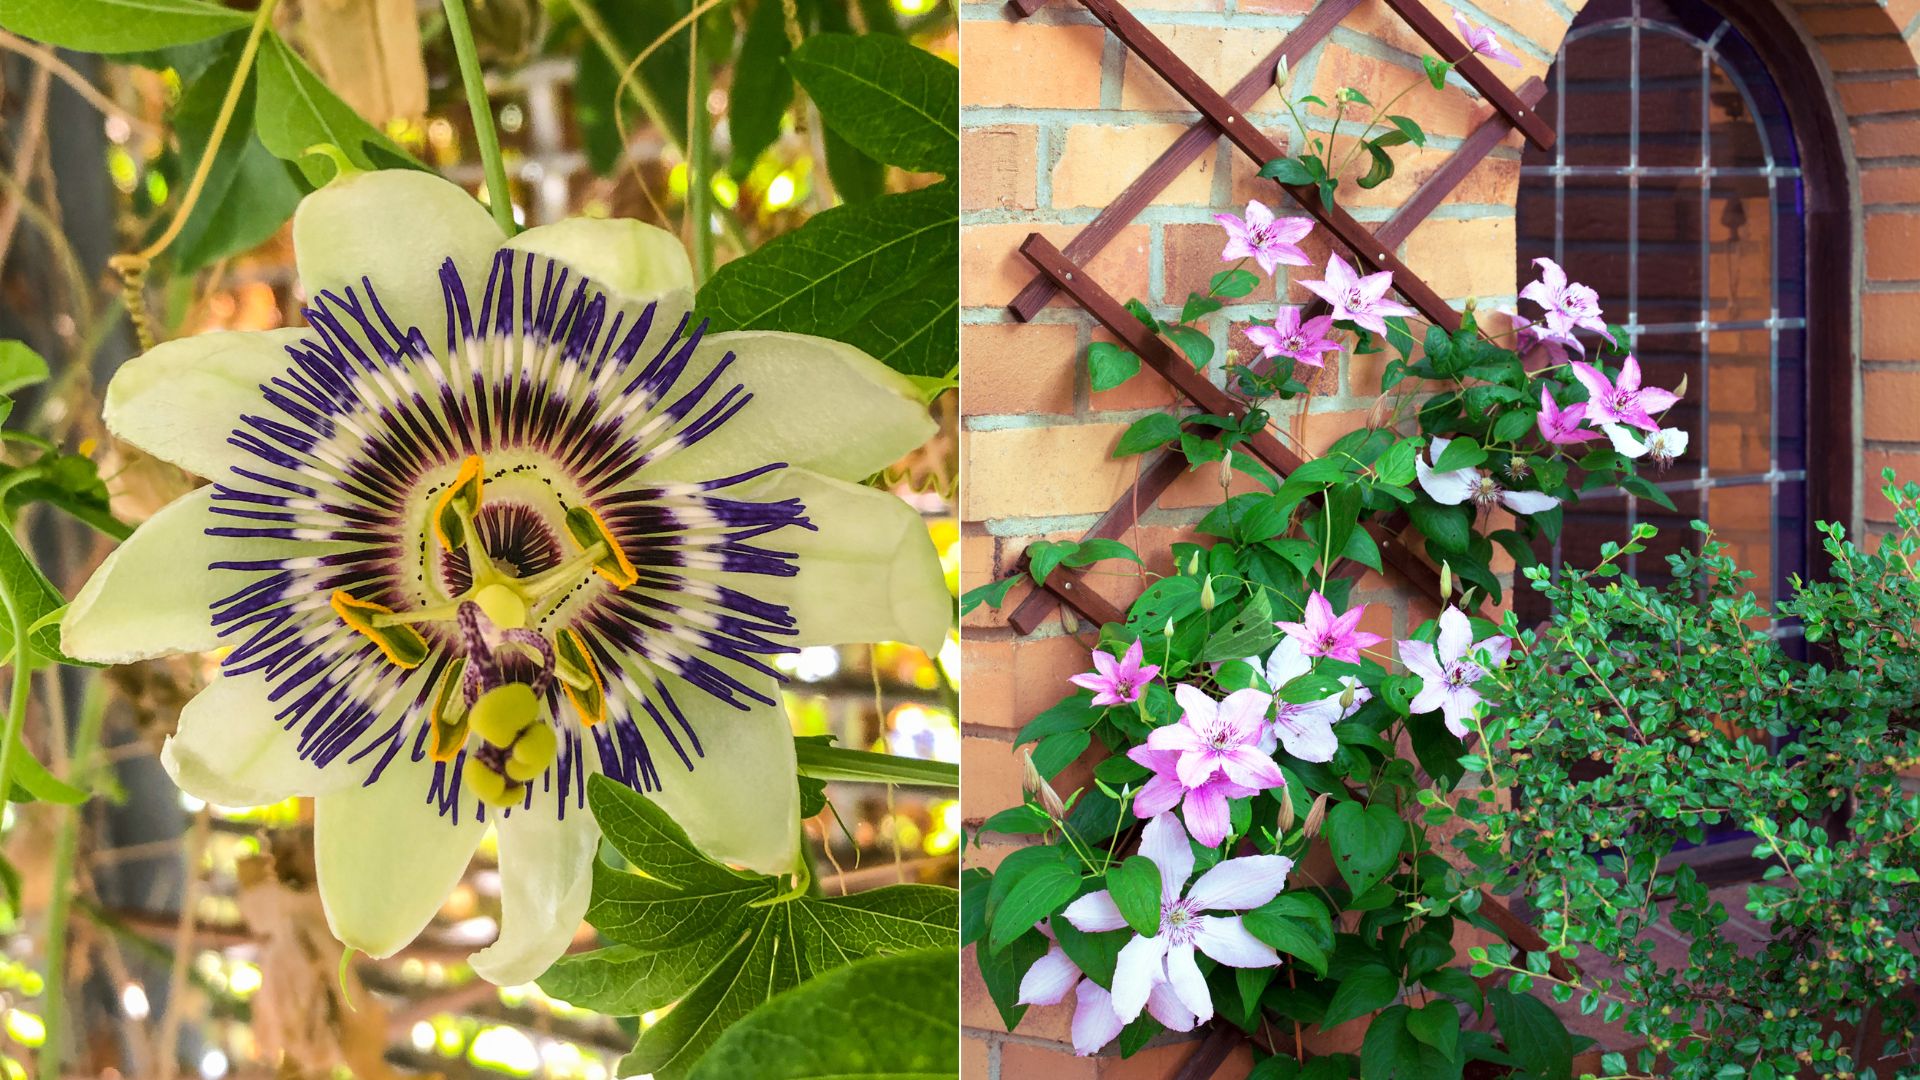 5 Stunning Climbing Plants For Trellises, Arbors, And Archways